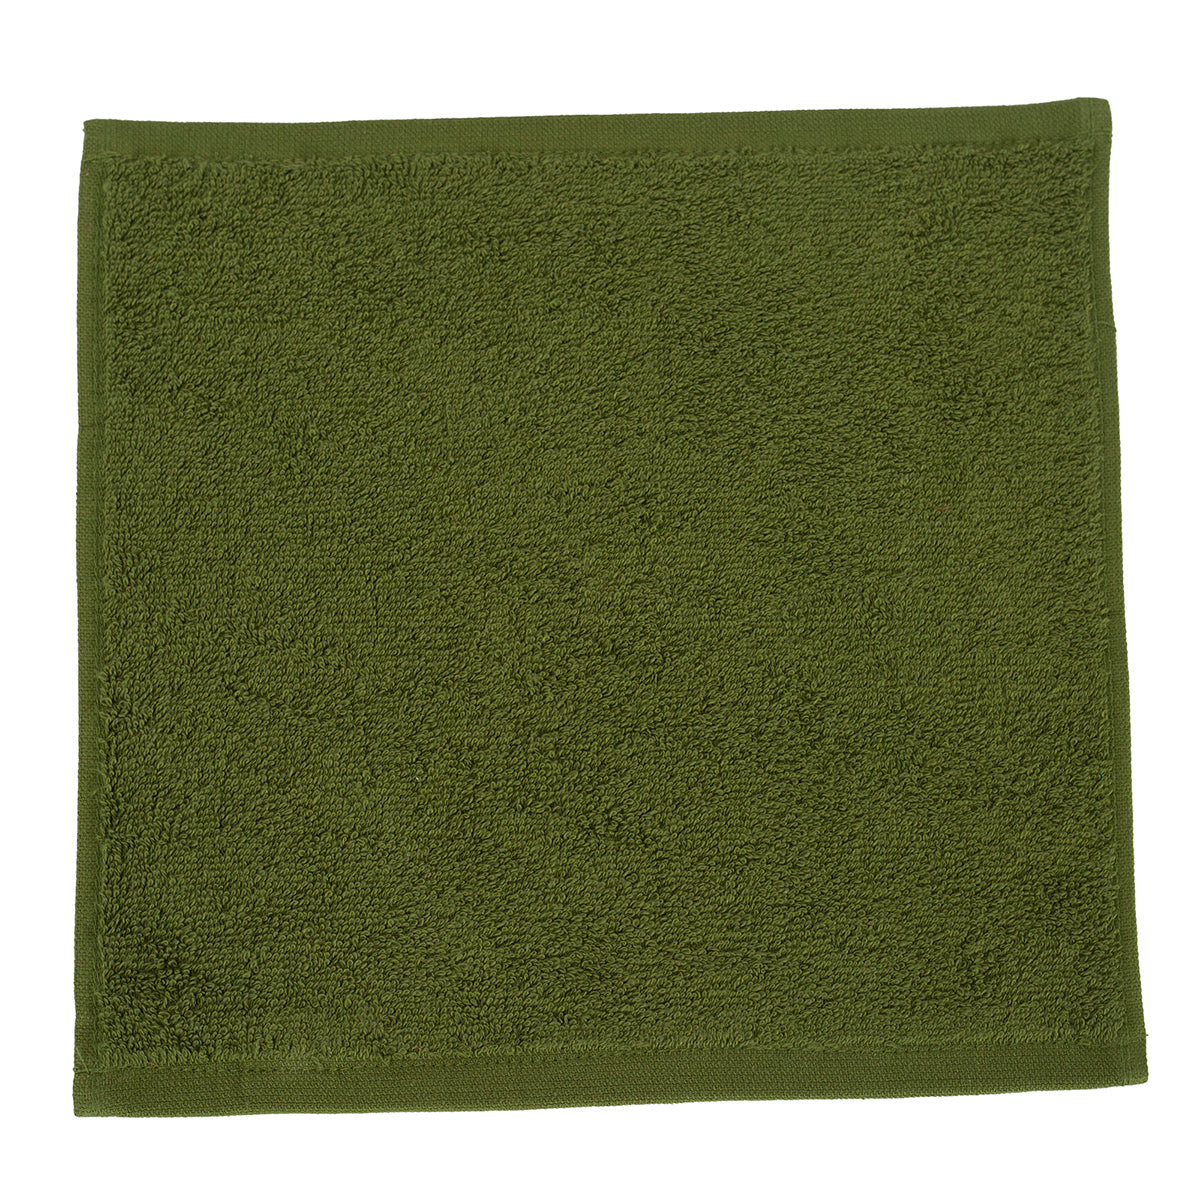 Jeneth Ultra-Soft and Highly Absorbent Calliste Green Face Towel Set